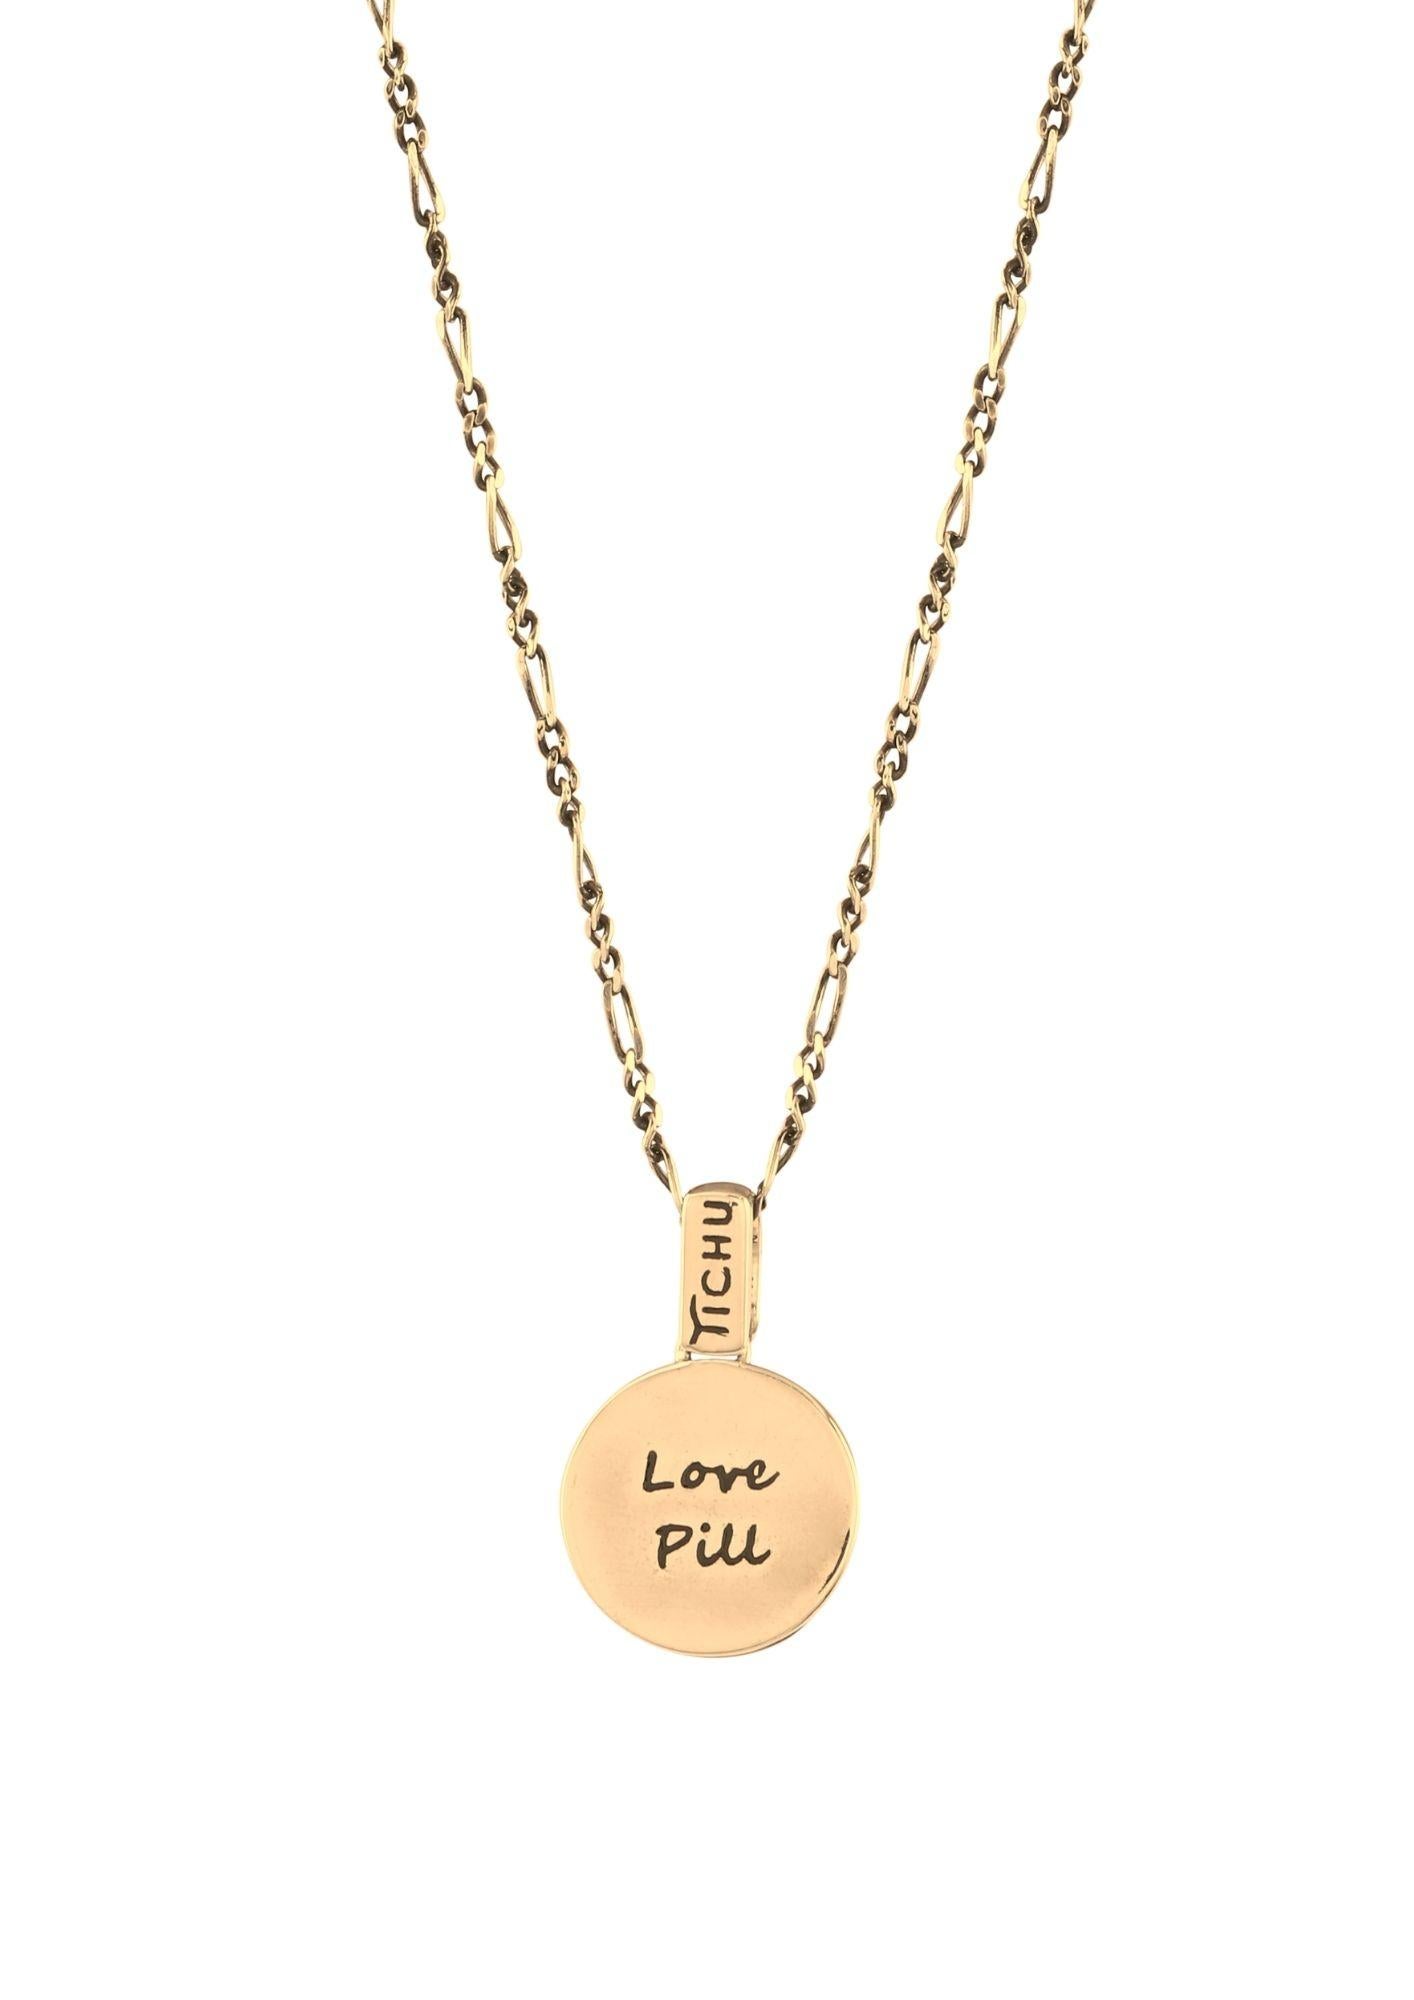 Love is what u do not what u say. It is a mutual attraction that unites two people together.

Each Love Pill Pendant is handcrafted in Sterling Silver, specially Pill cut Crystal Quartz. The use of special techniques used to craft the crystal in